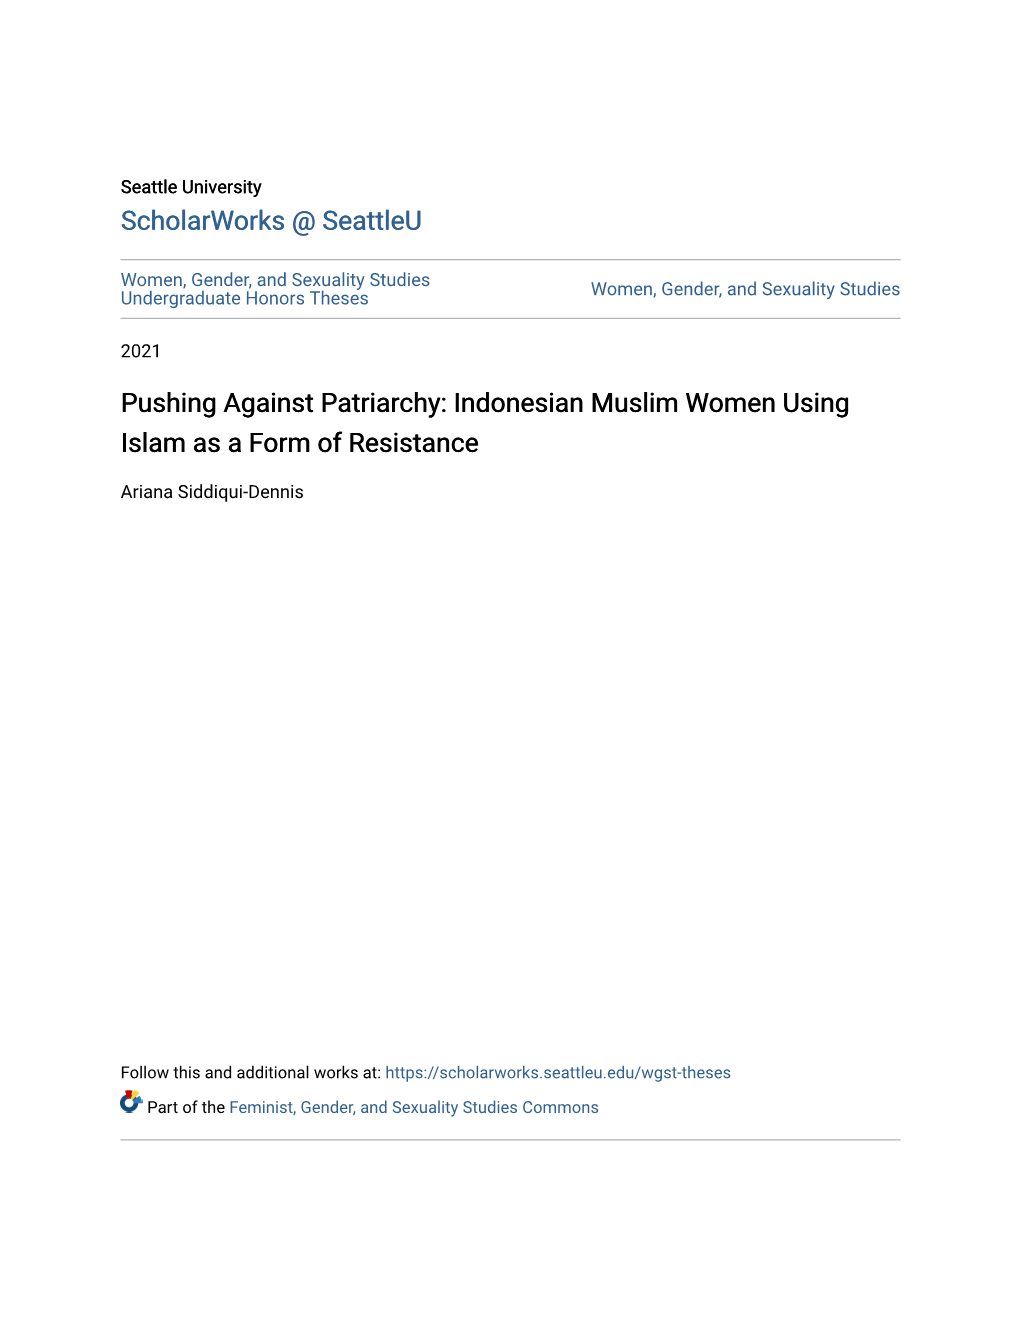 Indonesian Muslim Women Using Islam As a Form of Resistance